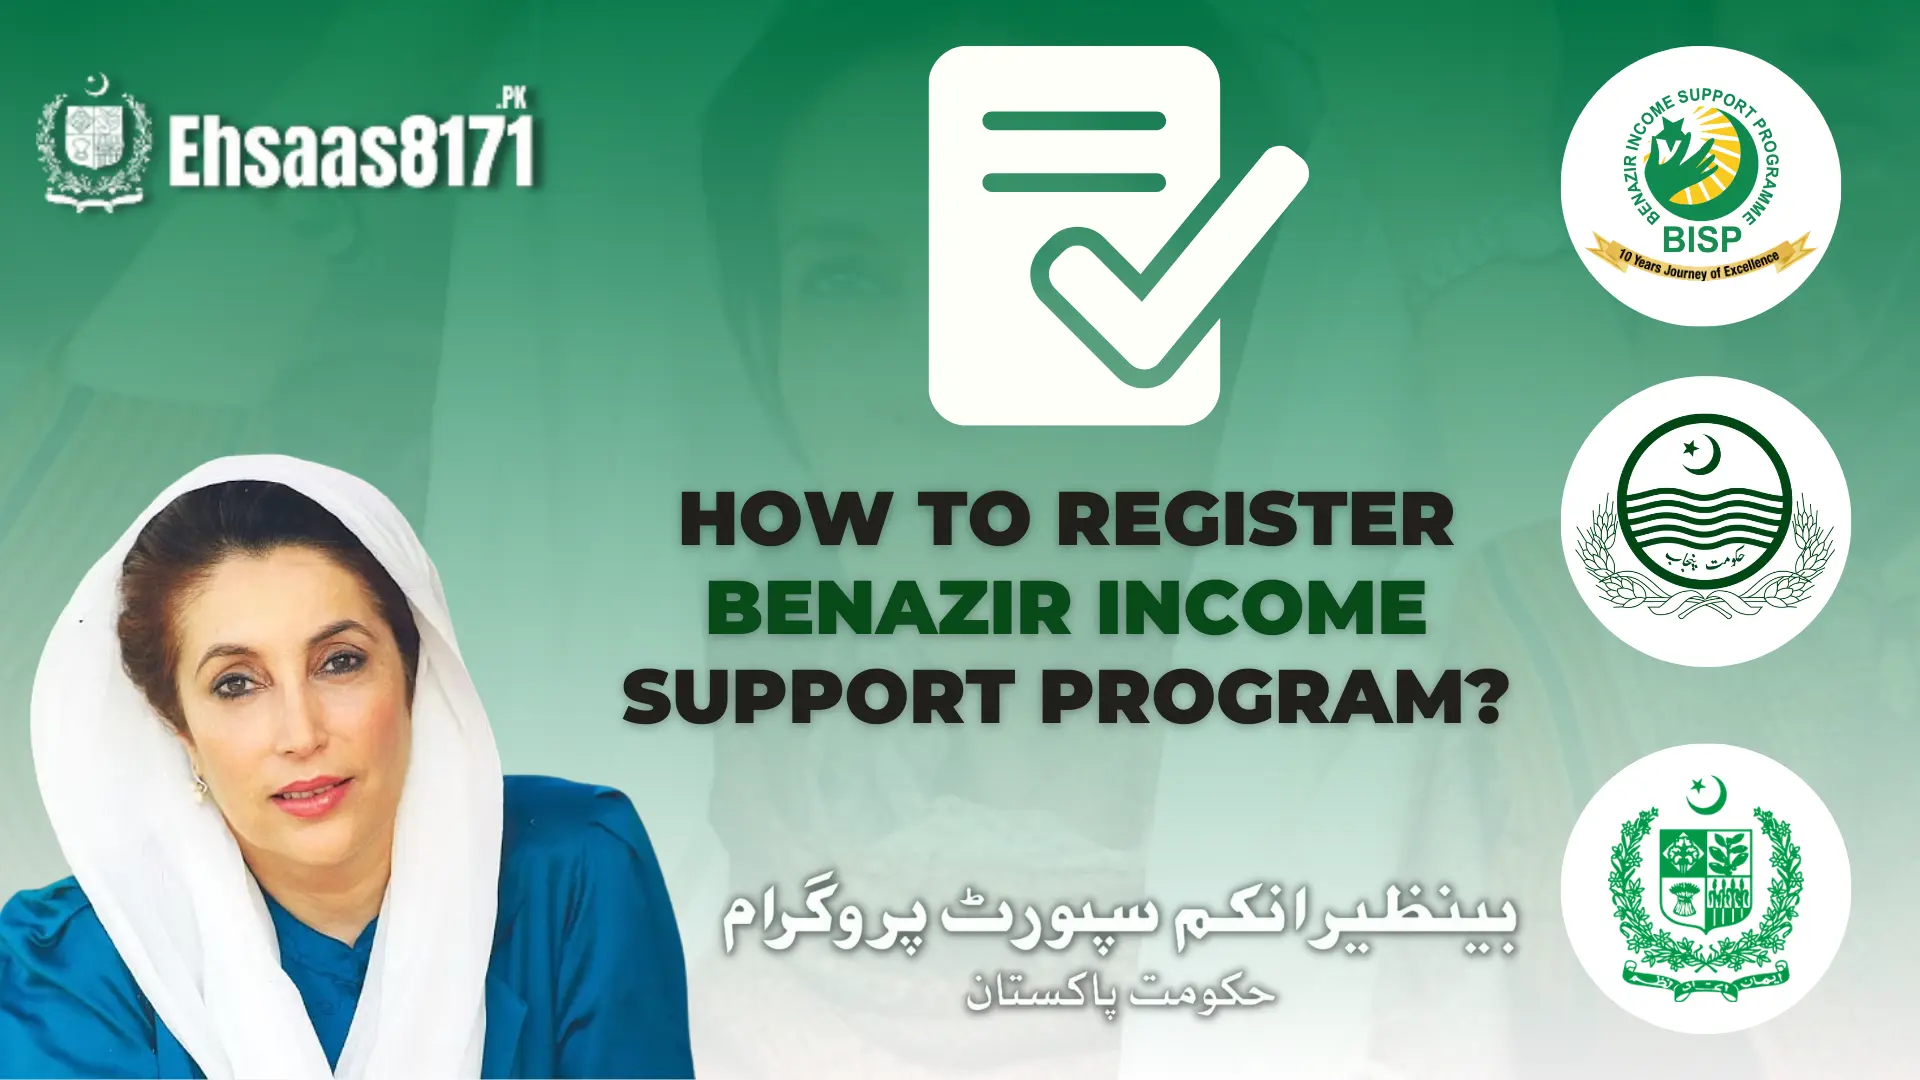 How to Register Benazir Income Support Program?